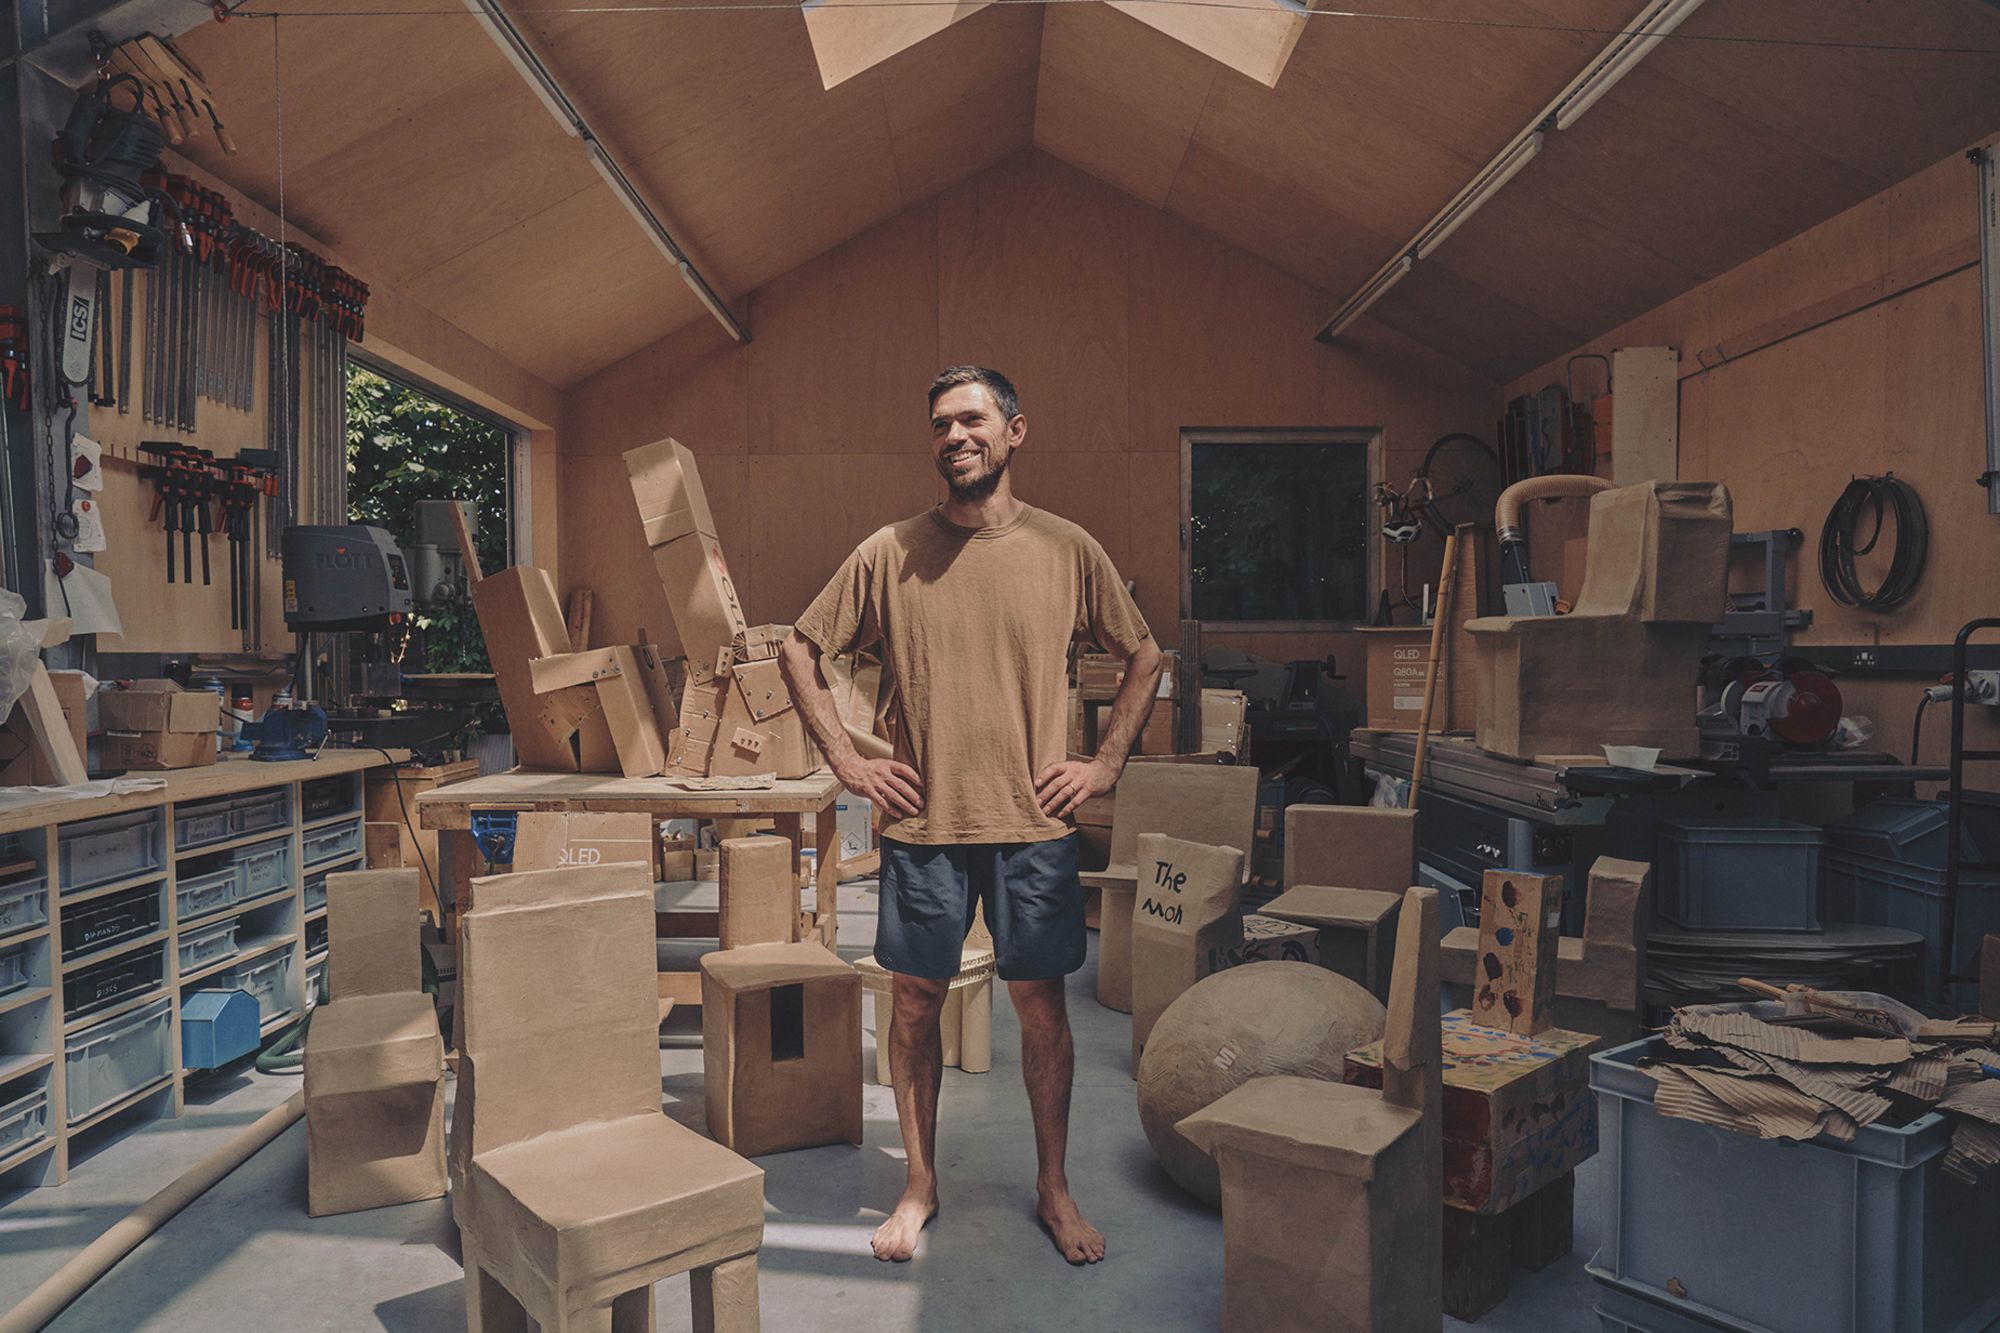 People are making furniture out of cardboard, and it looks like this